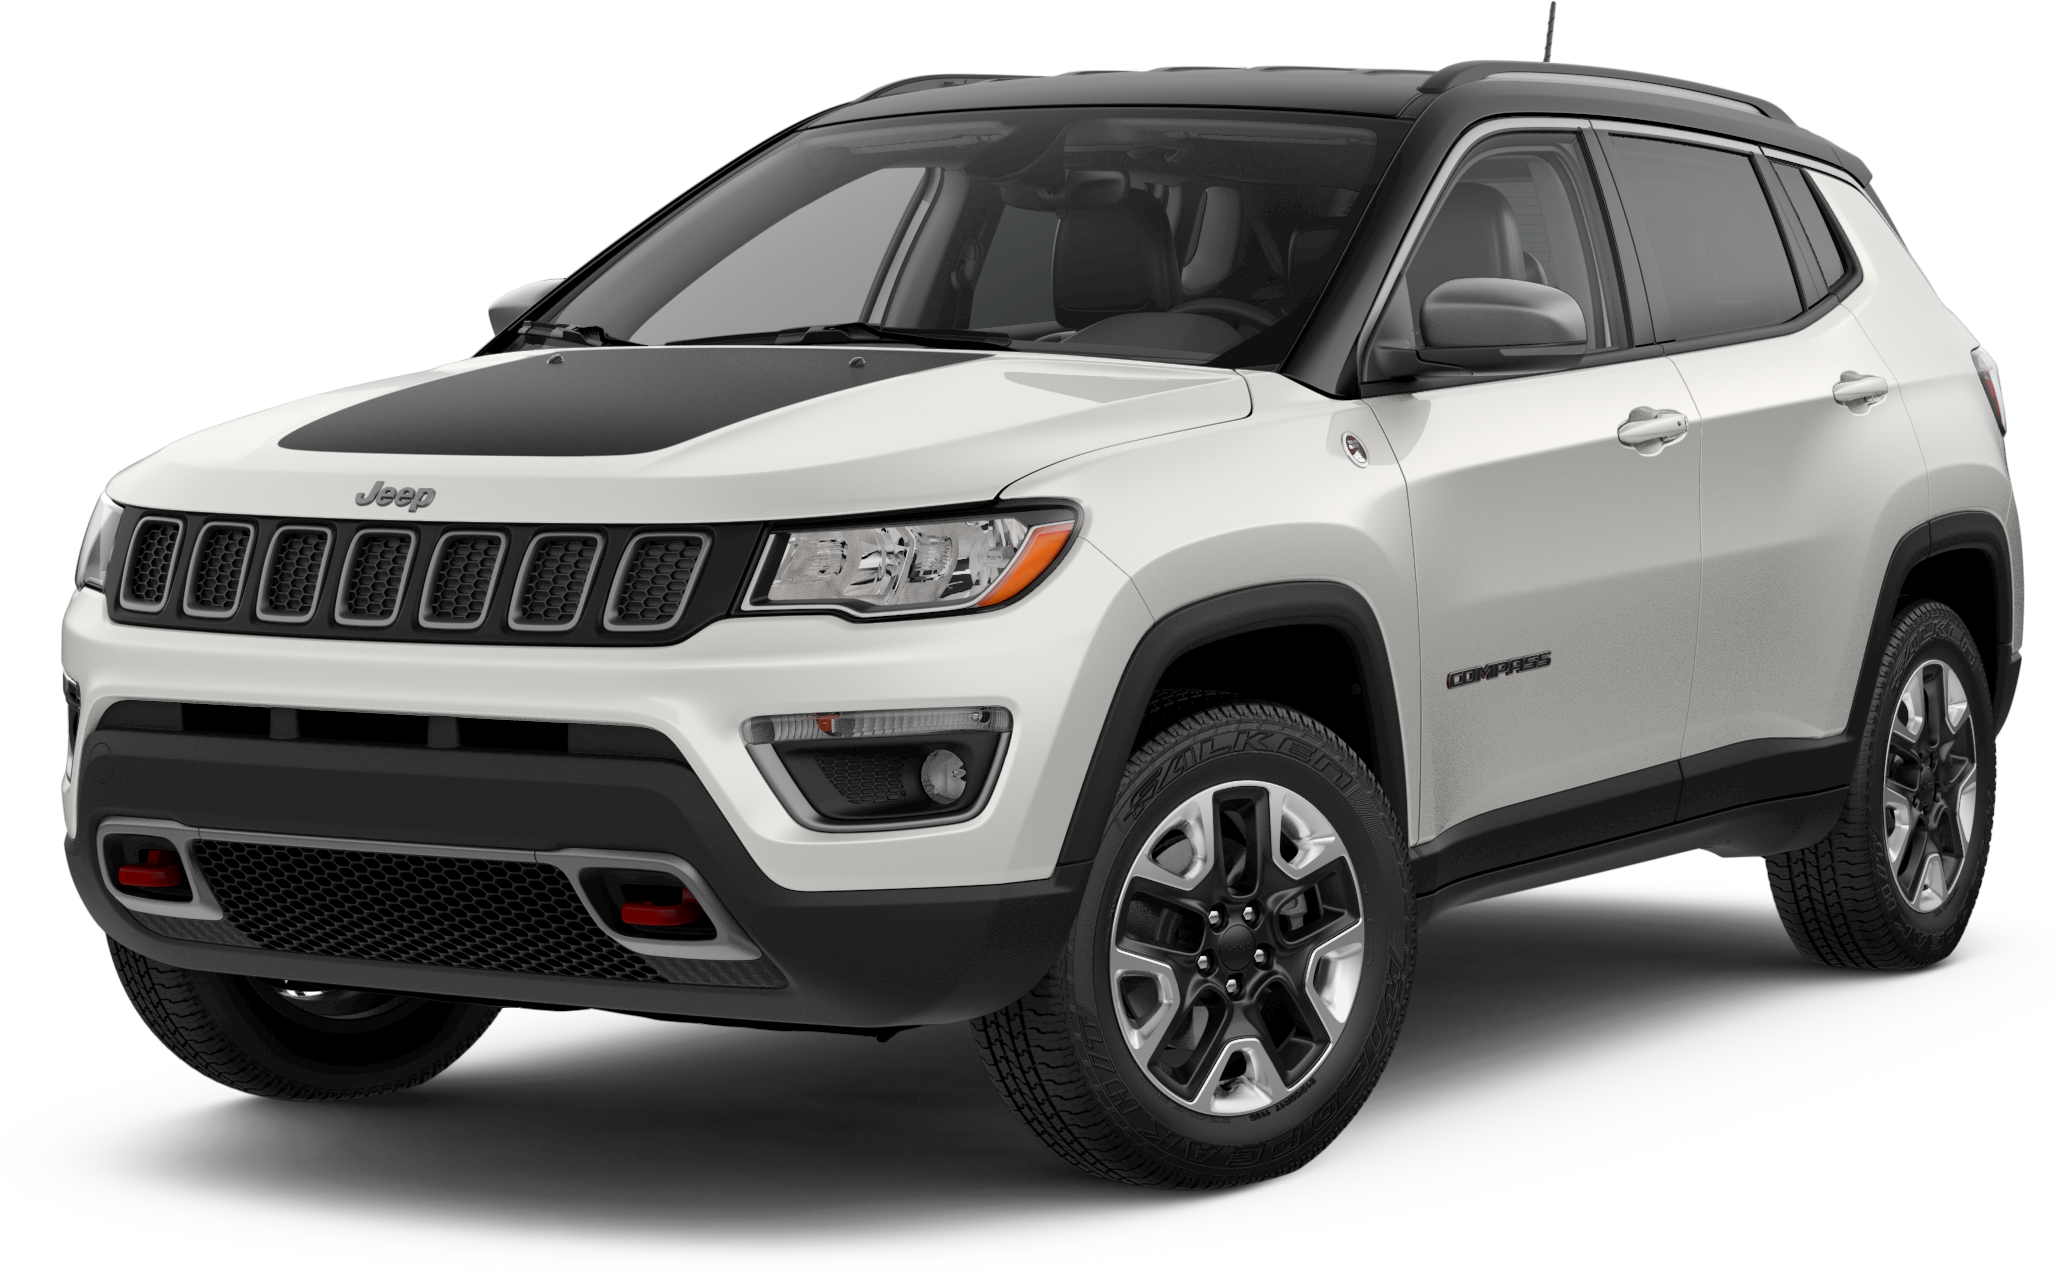 2018-jeep-compass-incentives-specials-offers-in-peoria-az